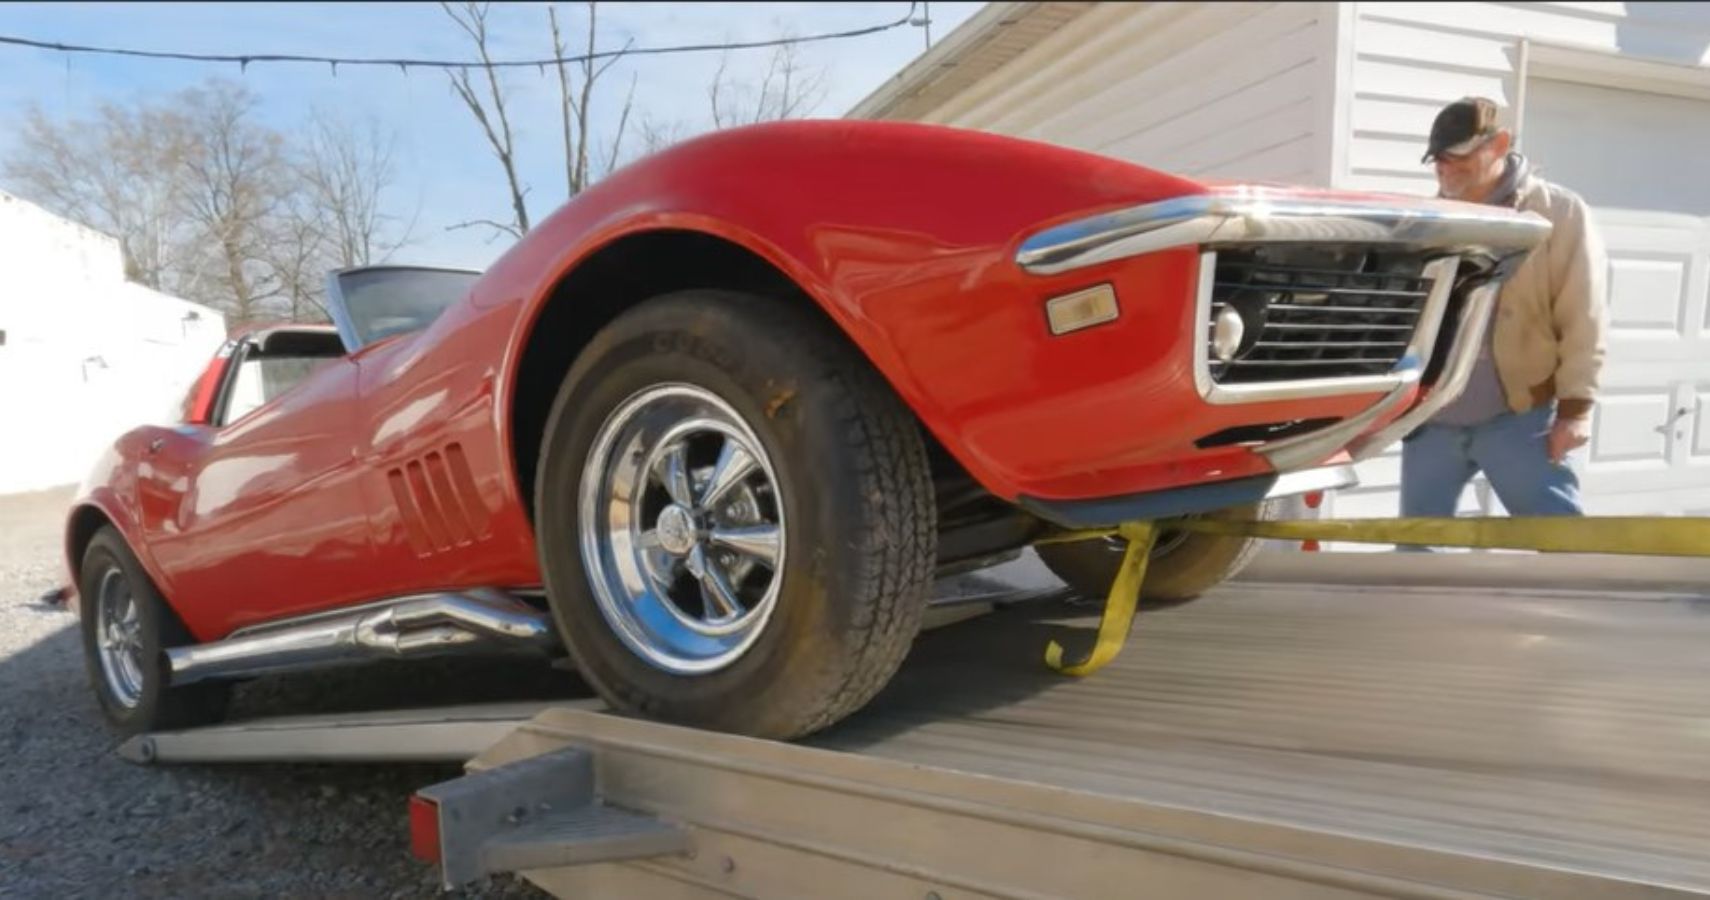 This Rare 1968 Chevrolet Corvette With A Custom Paint Job Is A Barn Find Dream